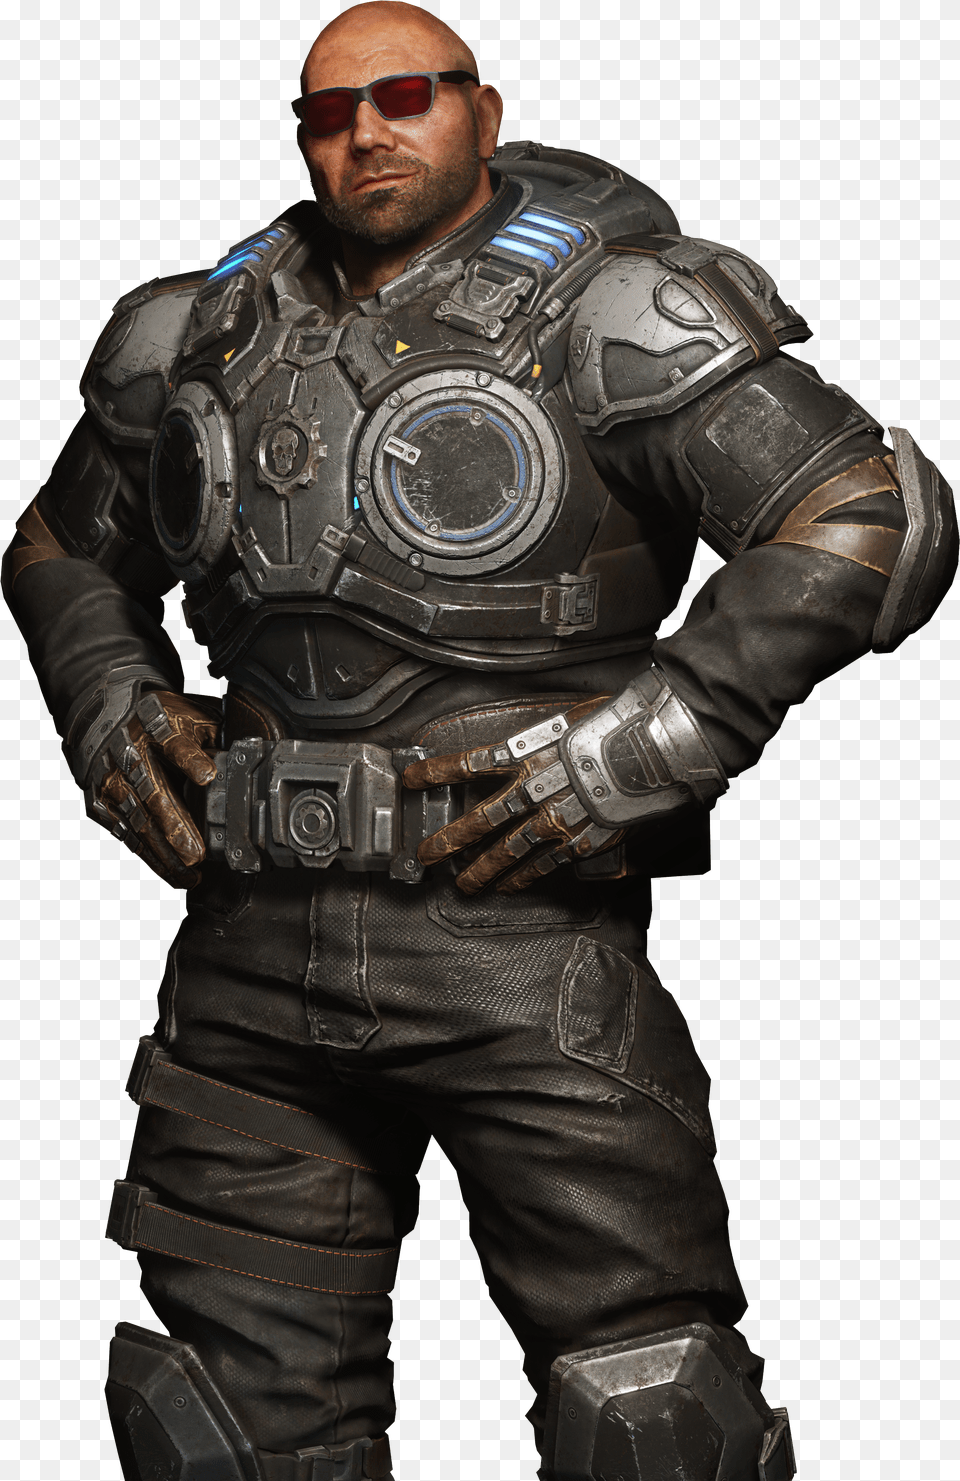 Gears Dave Bautista Gears Png Image